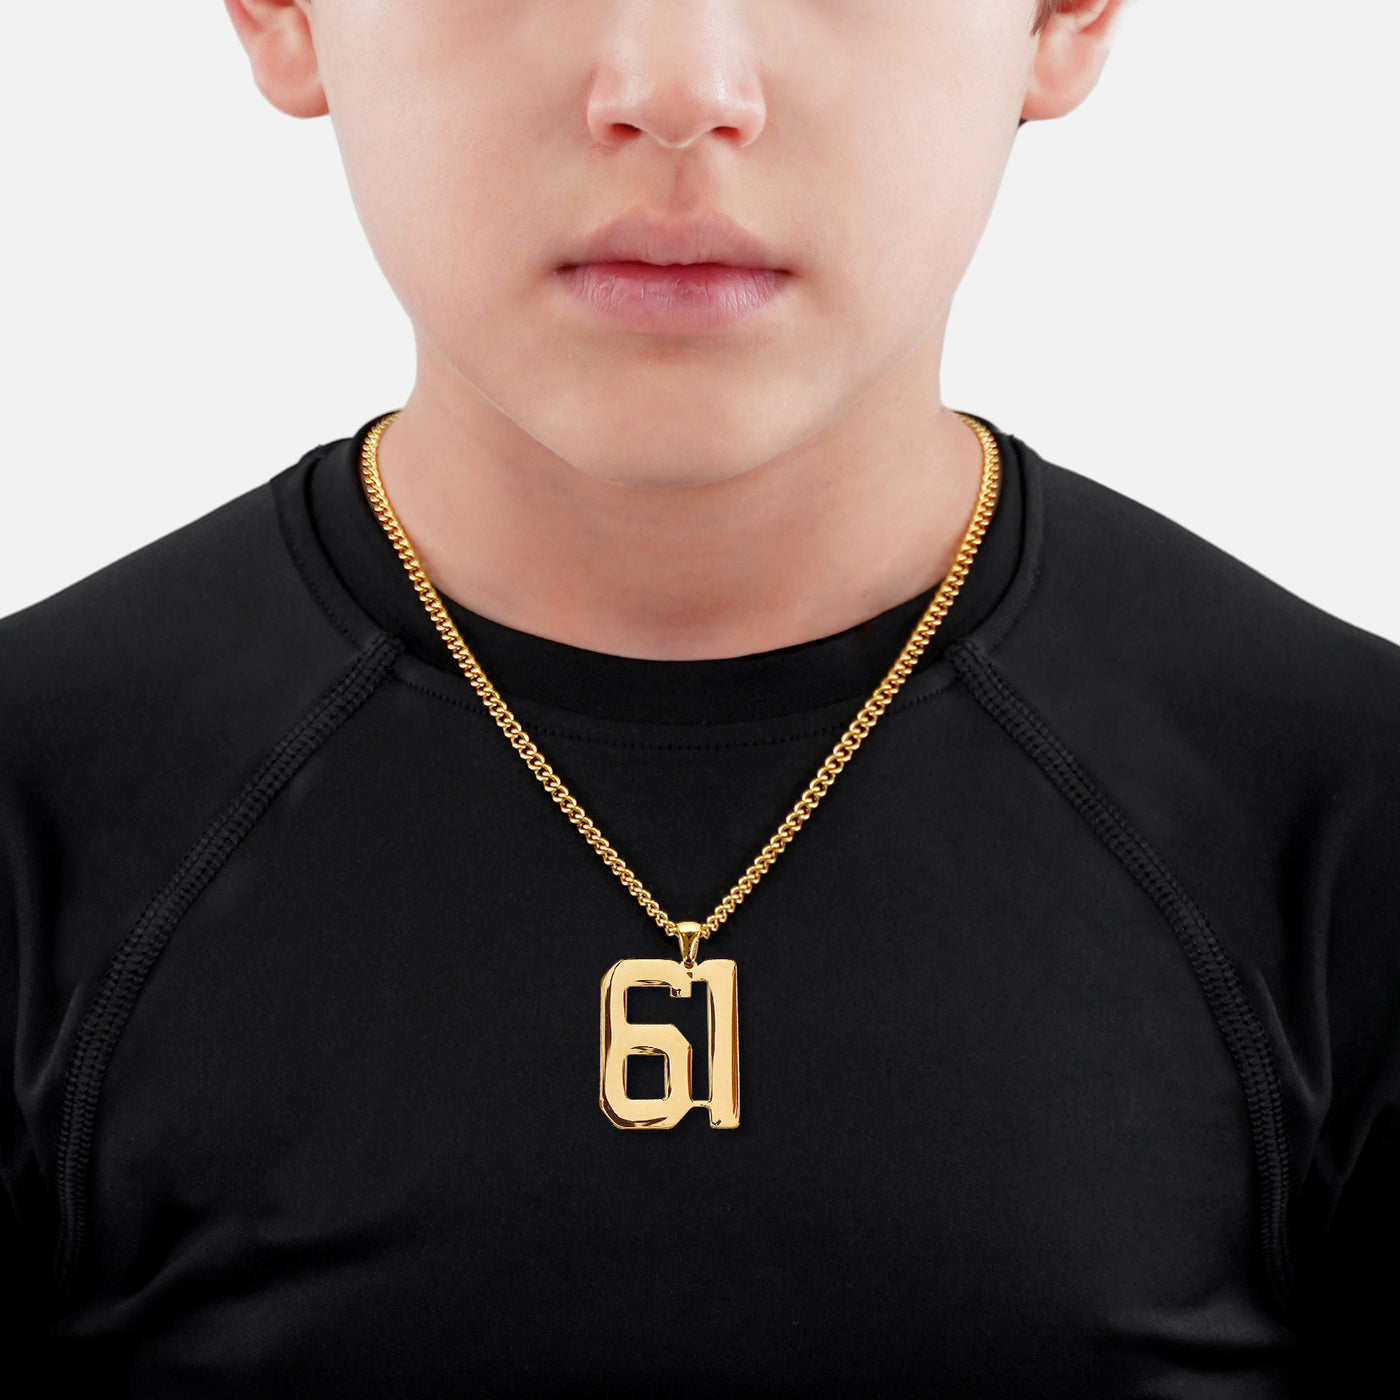 61 Number Pendant with Chain Kids Necklace - Gold Plated Stainless Steel